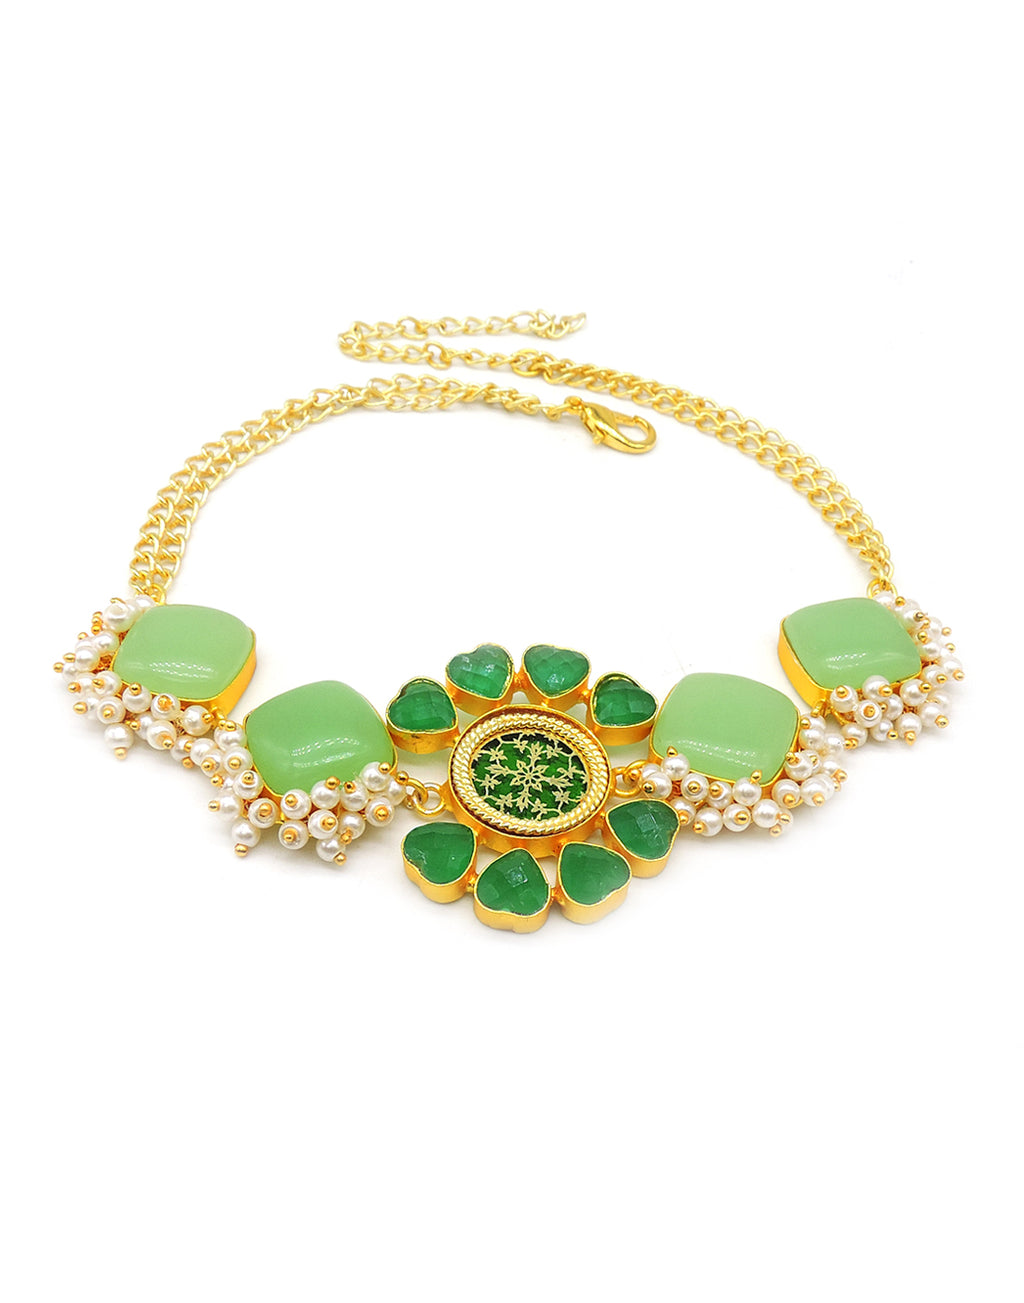 Green Flower Necklace - Statement Necklaces - Gold-Plated & Hypoallergenic Jewellery - Made in India - Dubai Jewellery - Dori